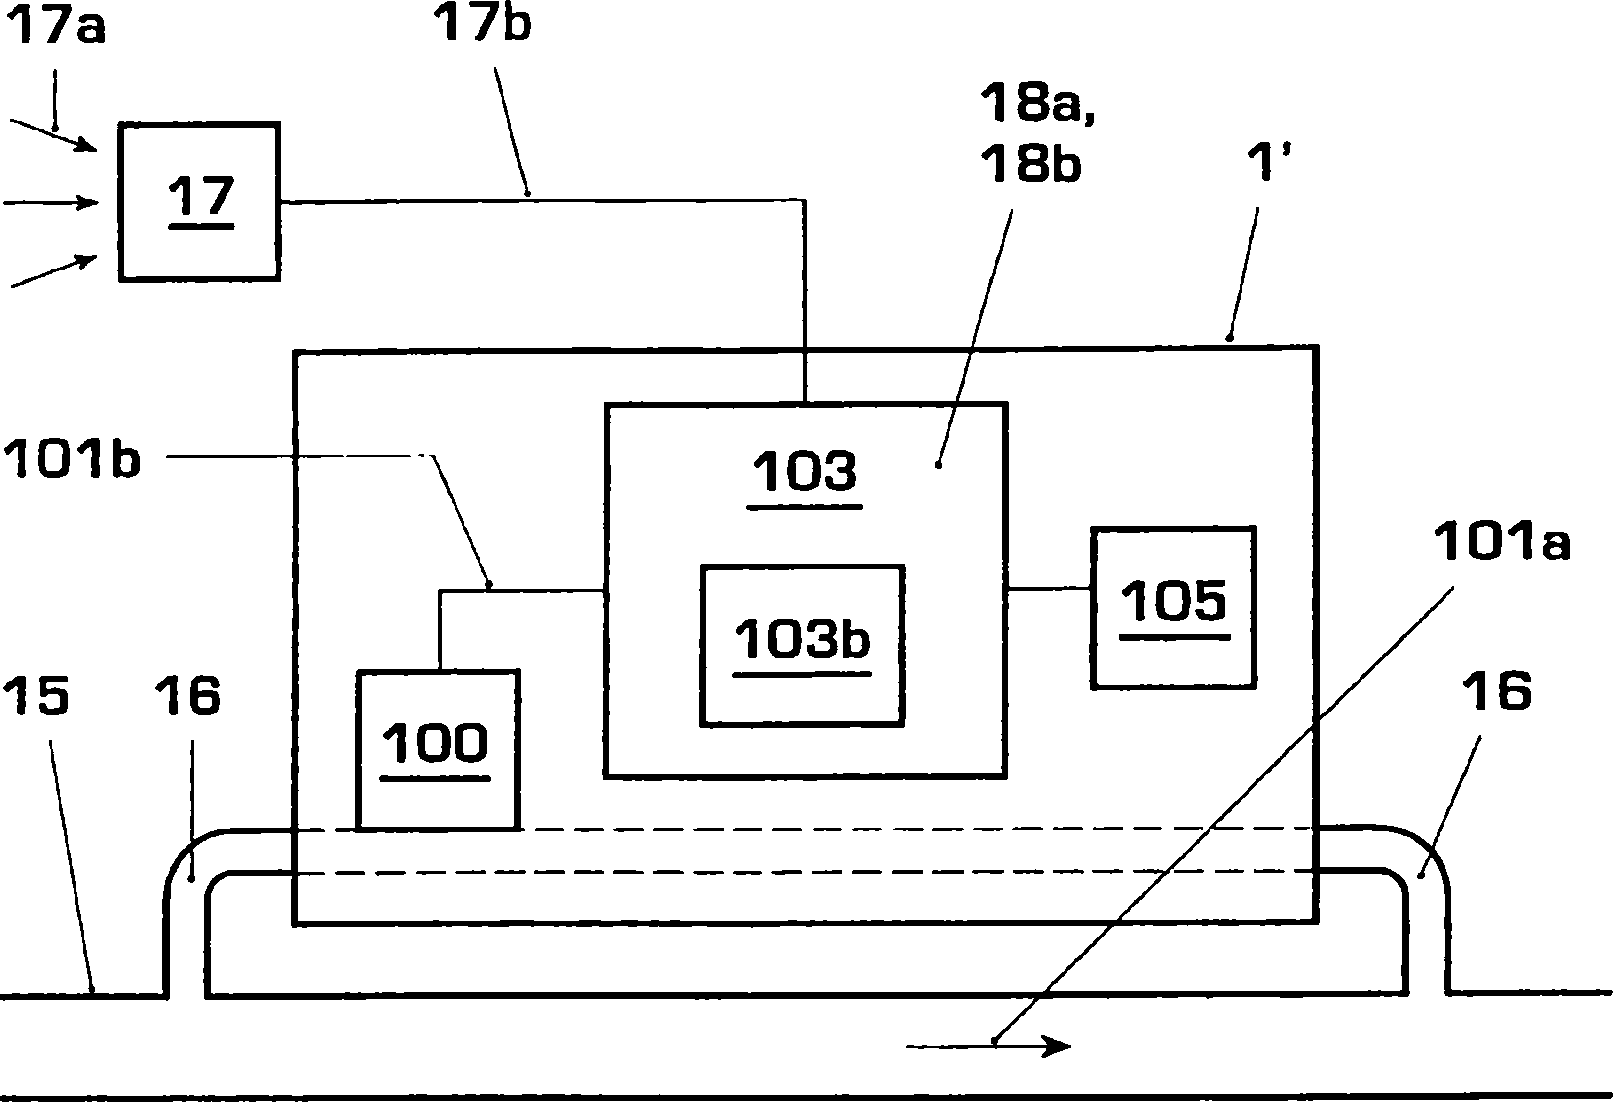 Method and apparatus for reducing power consumption in battery-operated devices